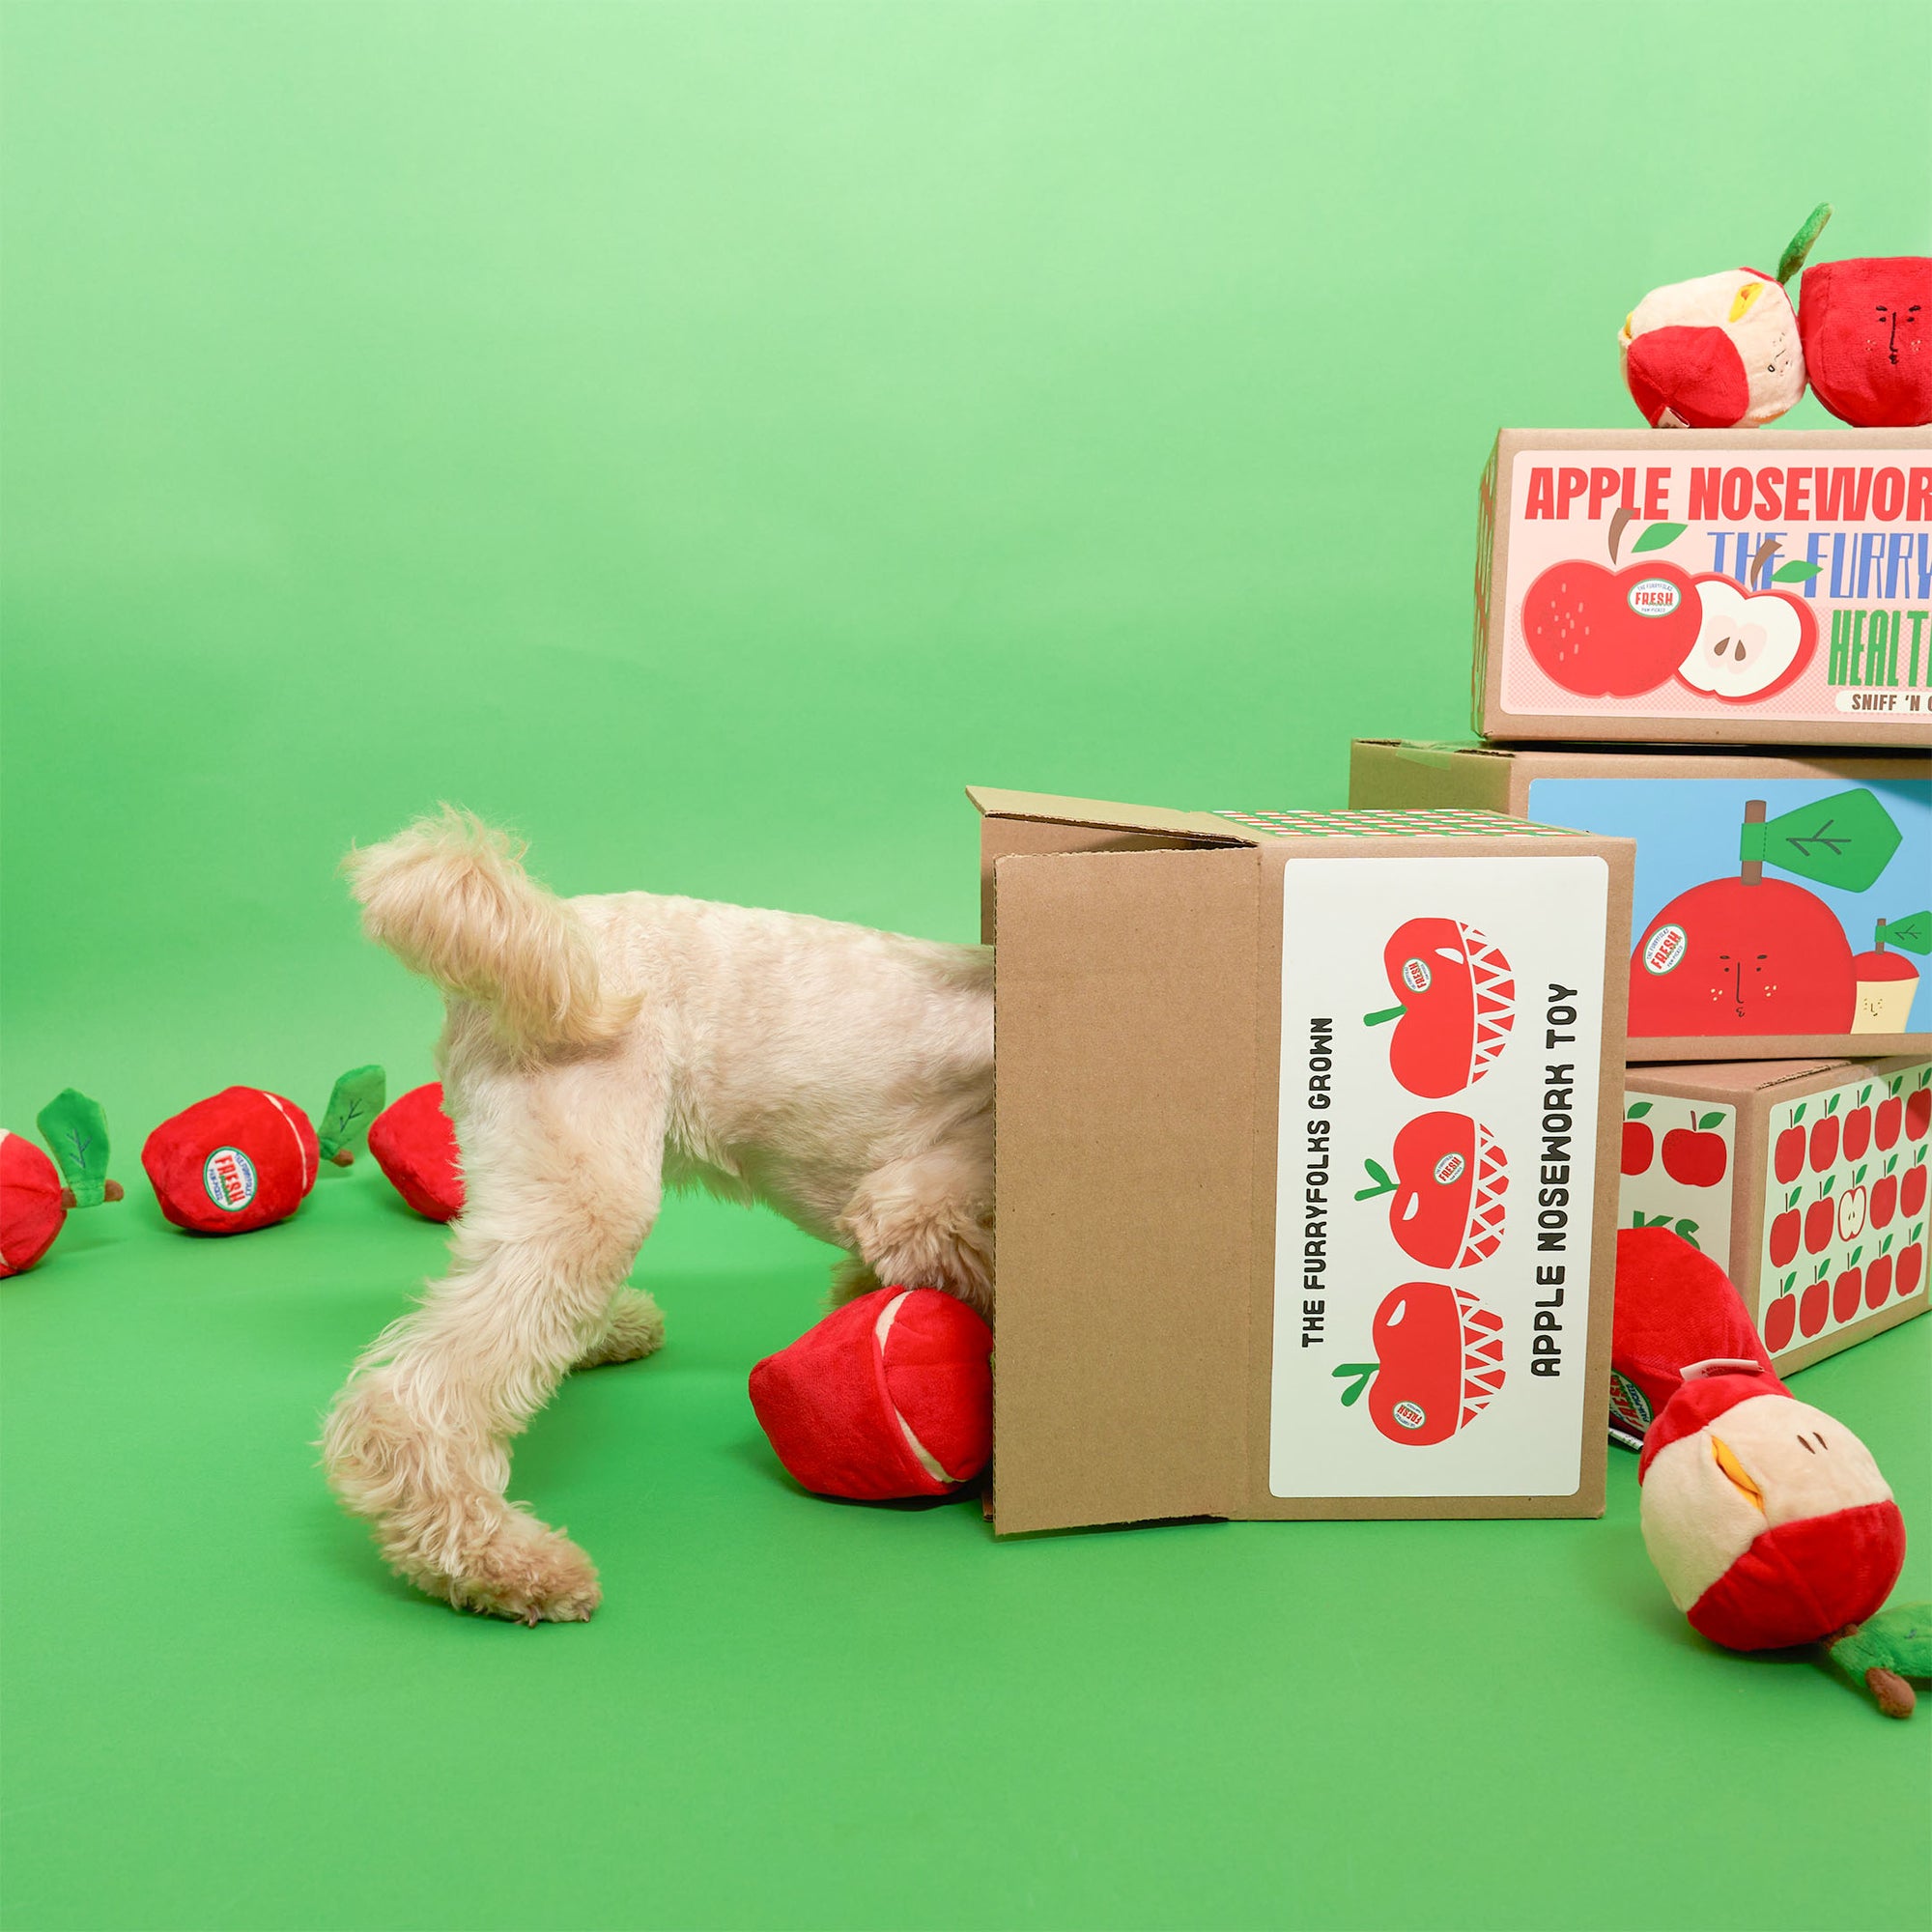 A white dog with its head in a cardboard box amidst several red apple-shaped dog toys scattered on a green background, with one toy featuring a partial white design. The box is labeled with "The Furryfolks Groin Apple Nosework Toy".